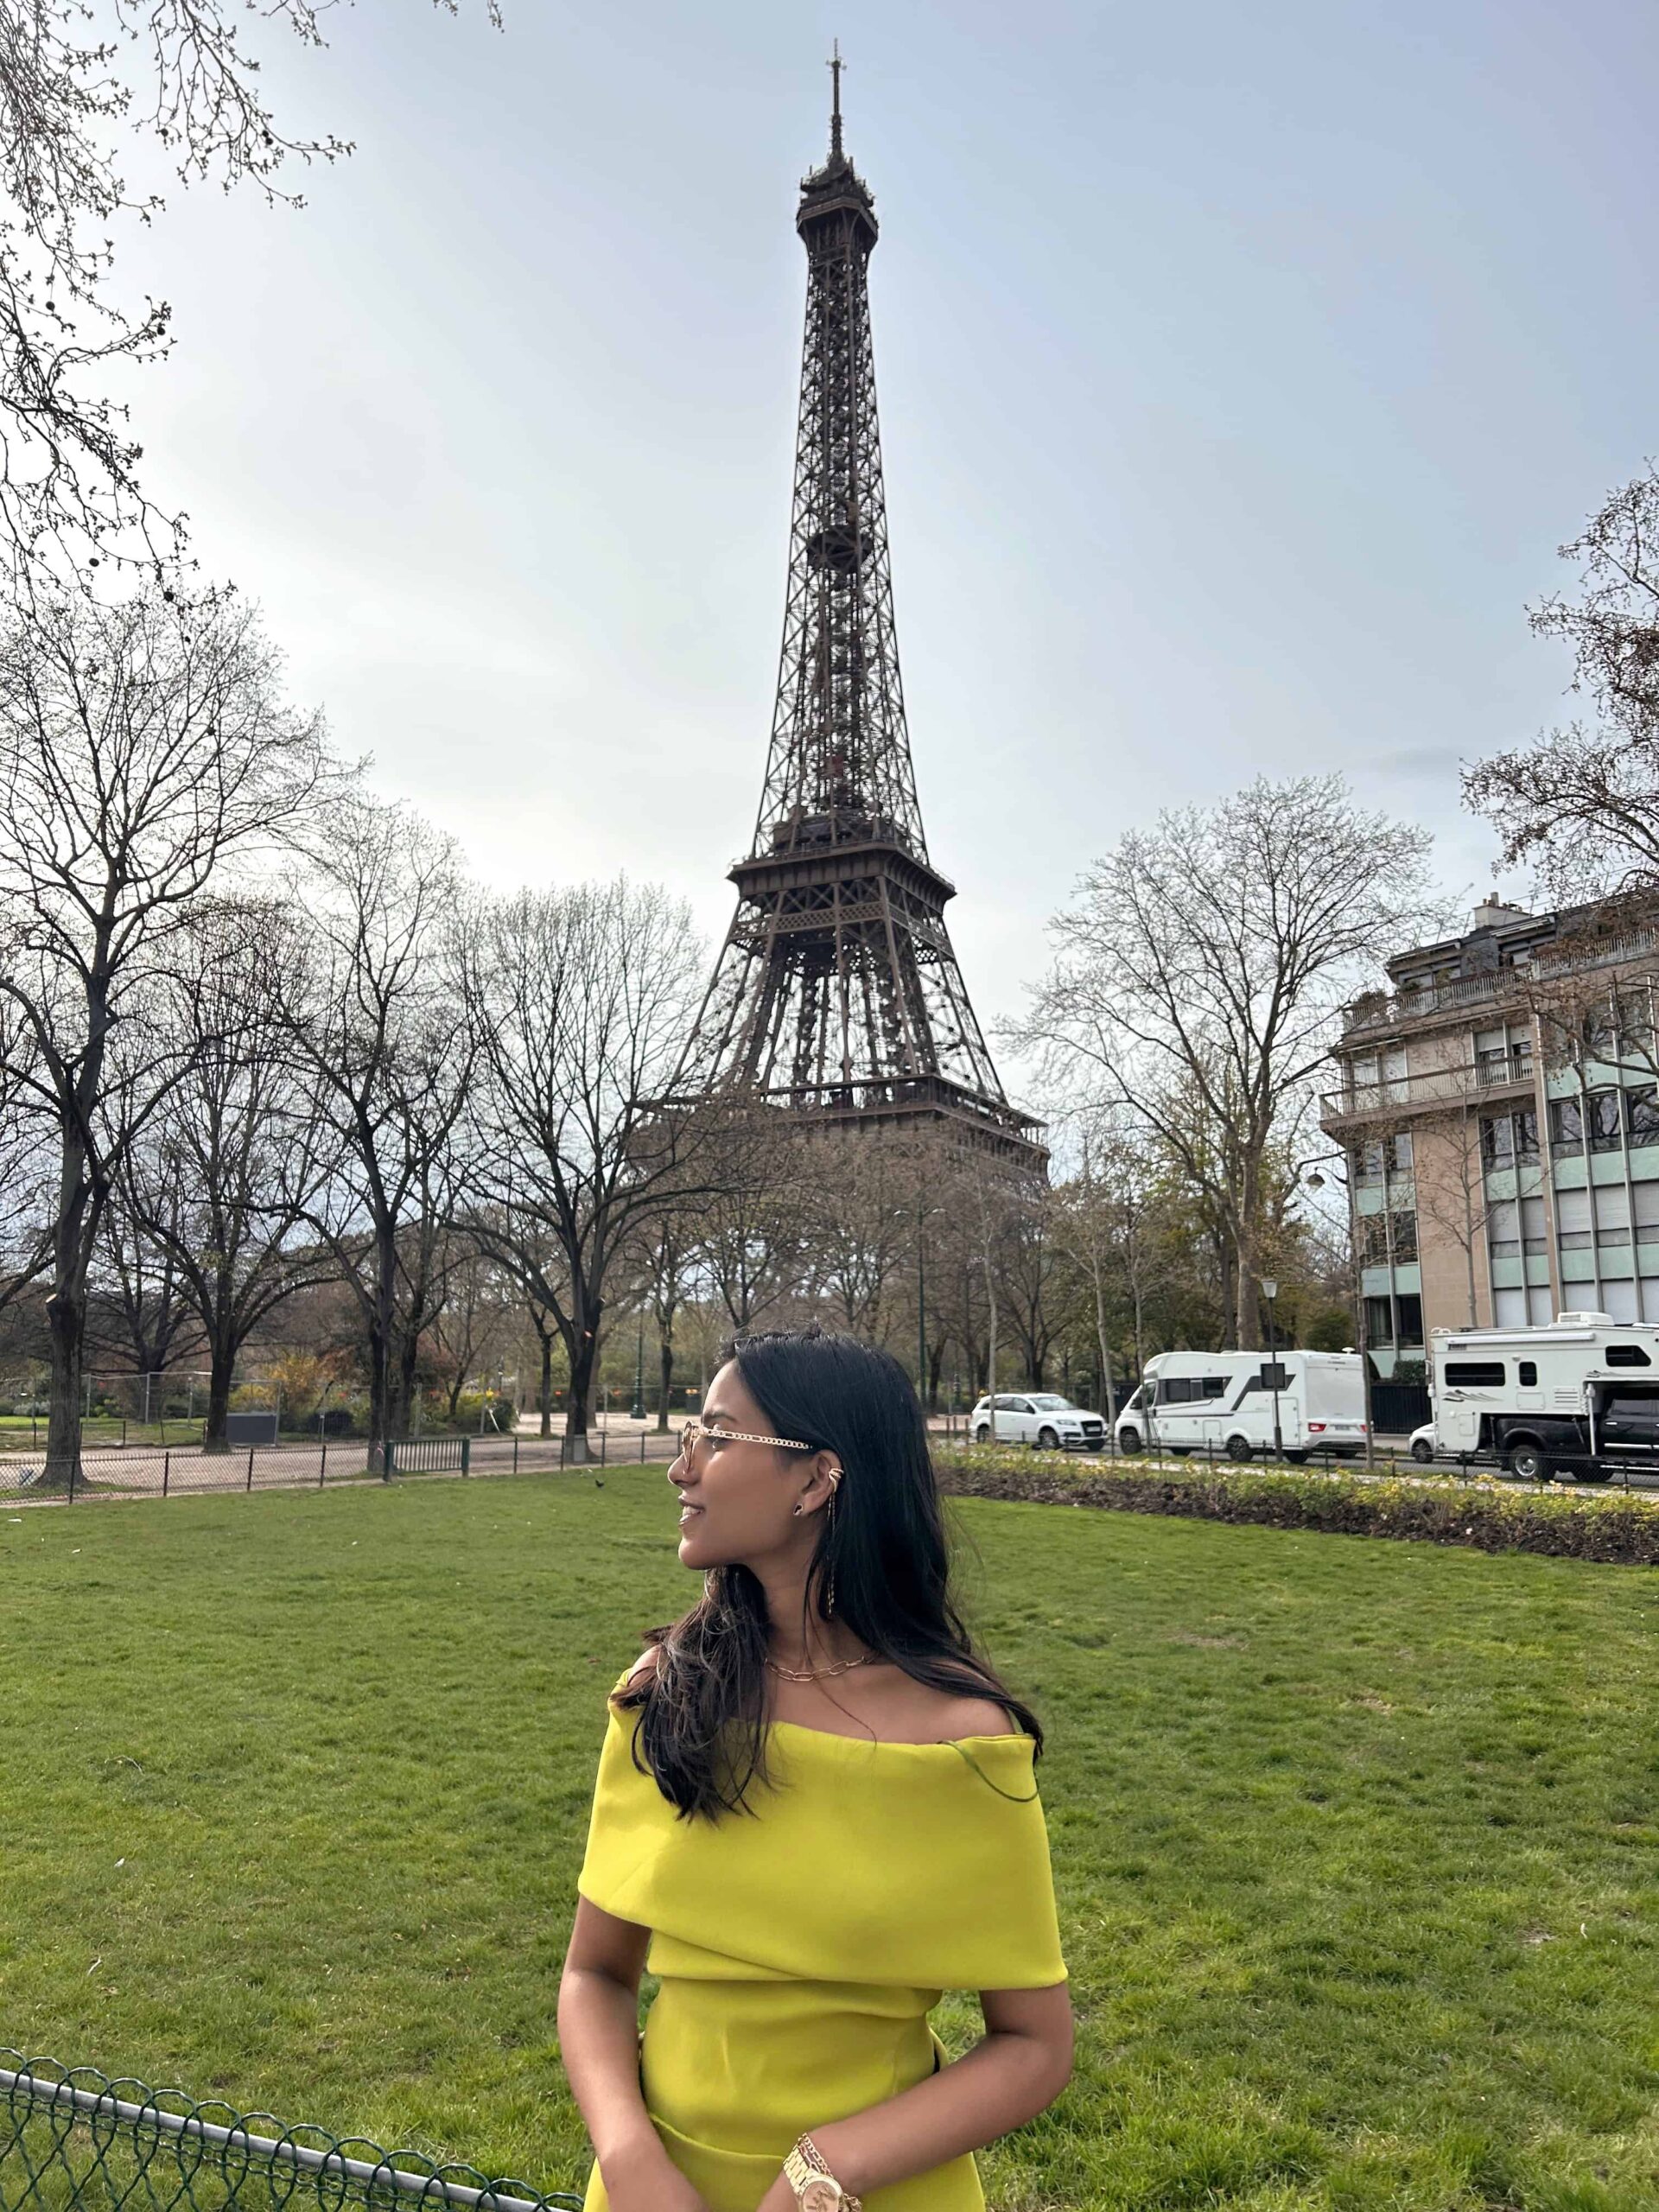 The ultimate dress for Eiffel Tower